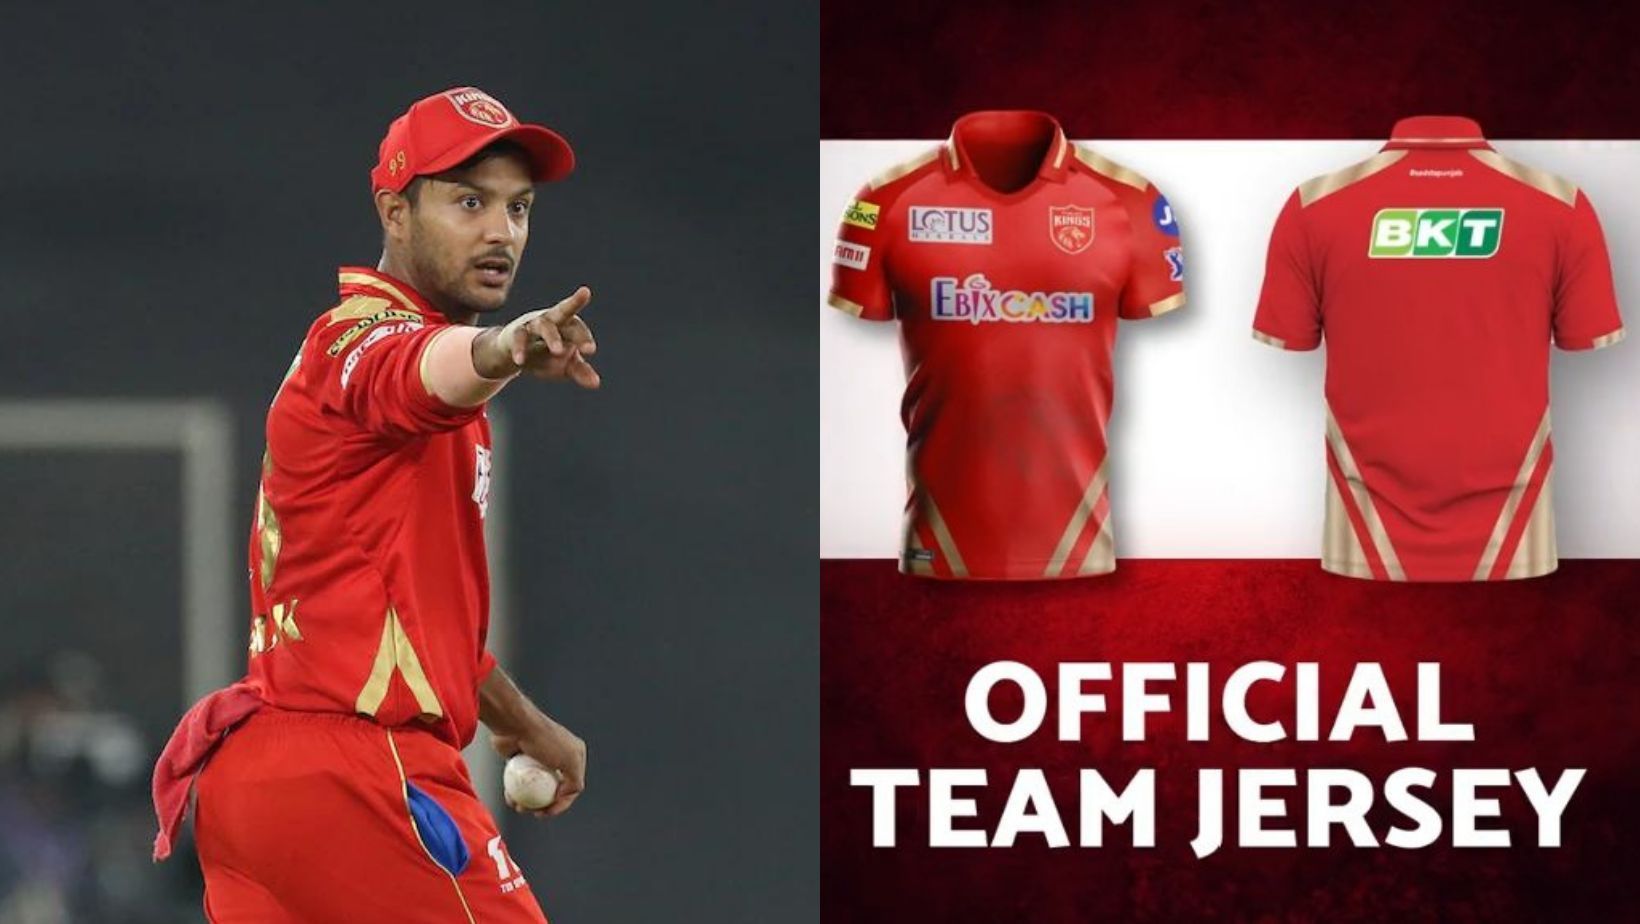 Punjab Kings jersey is almost the same as last year.